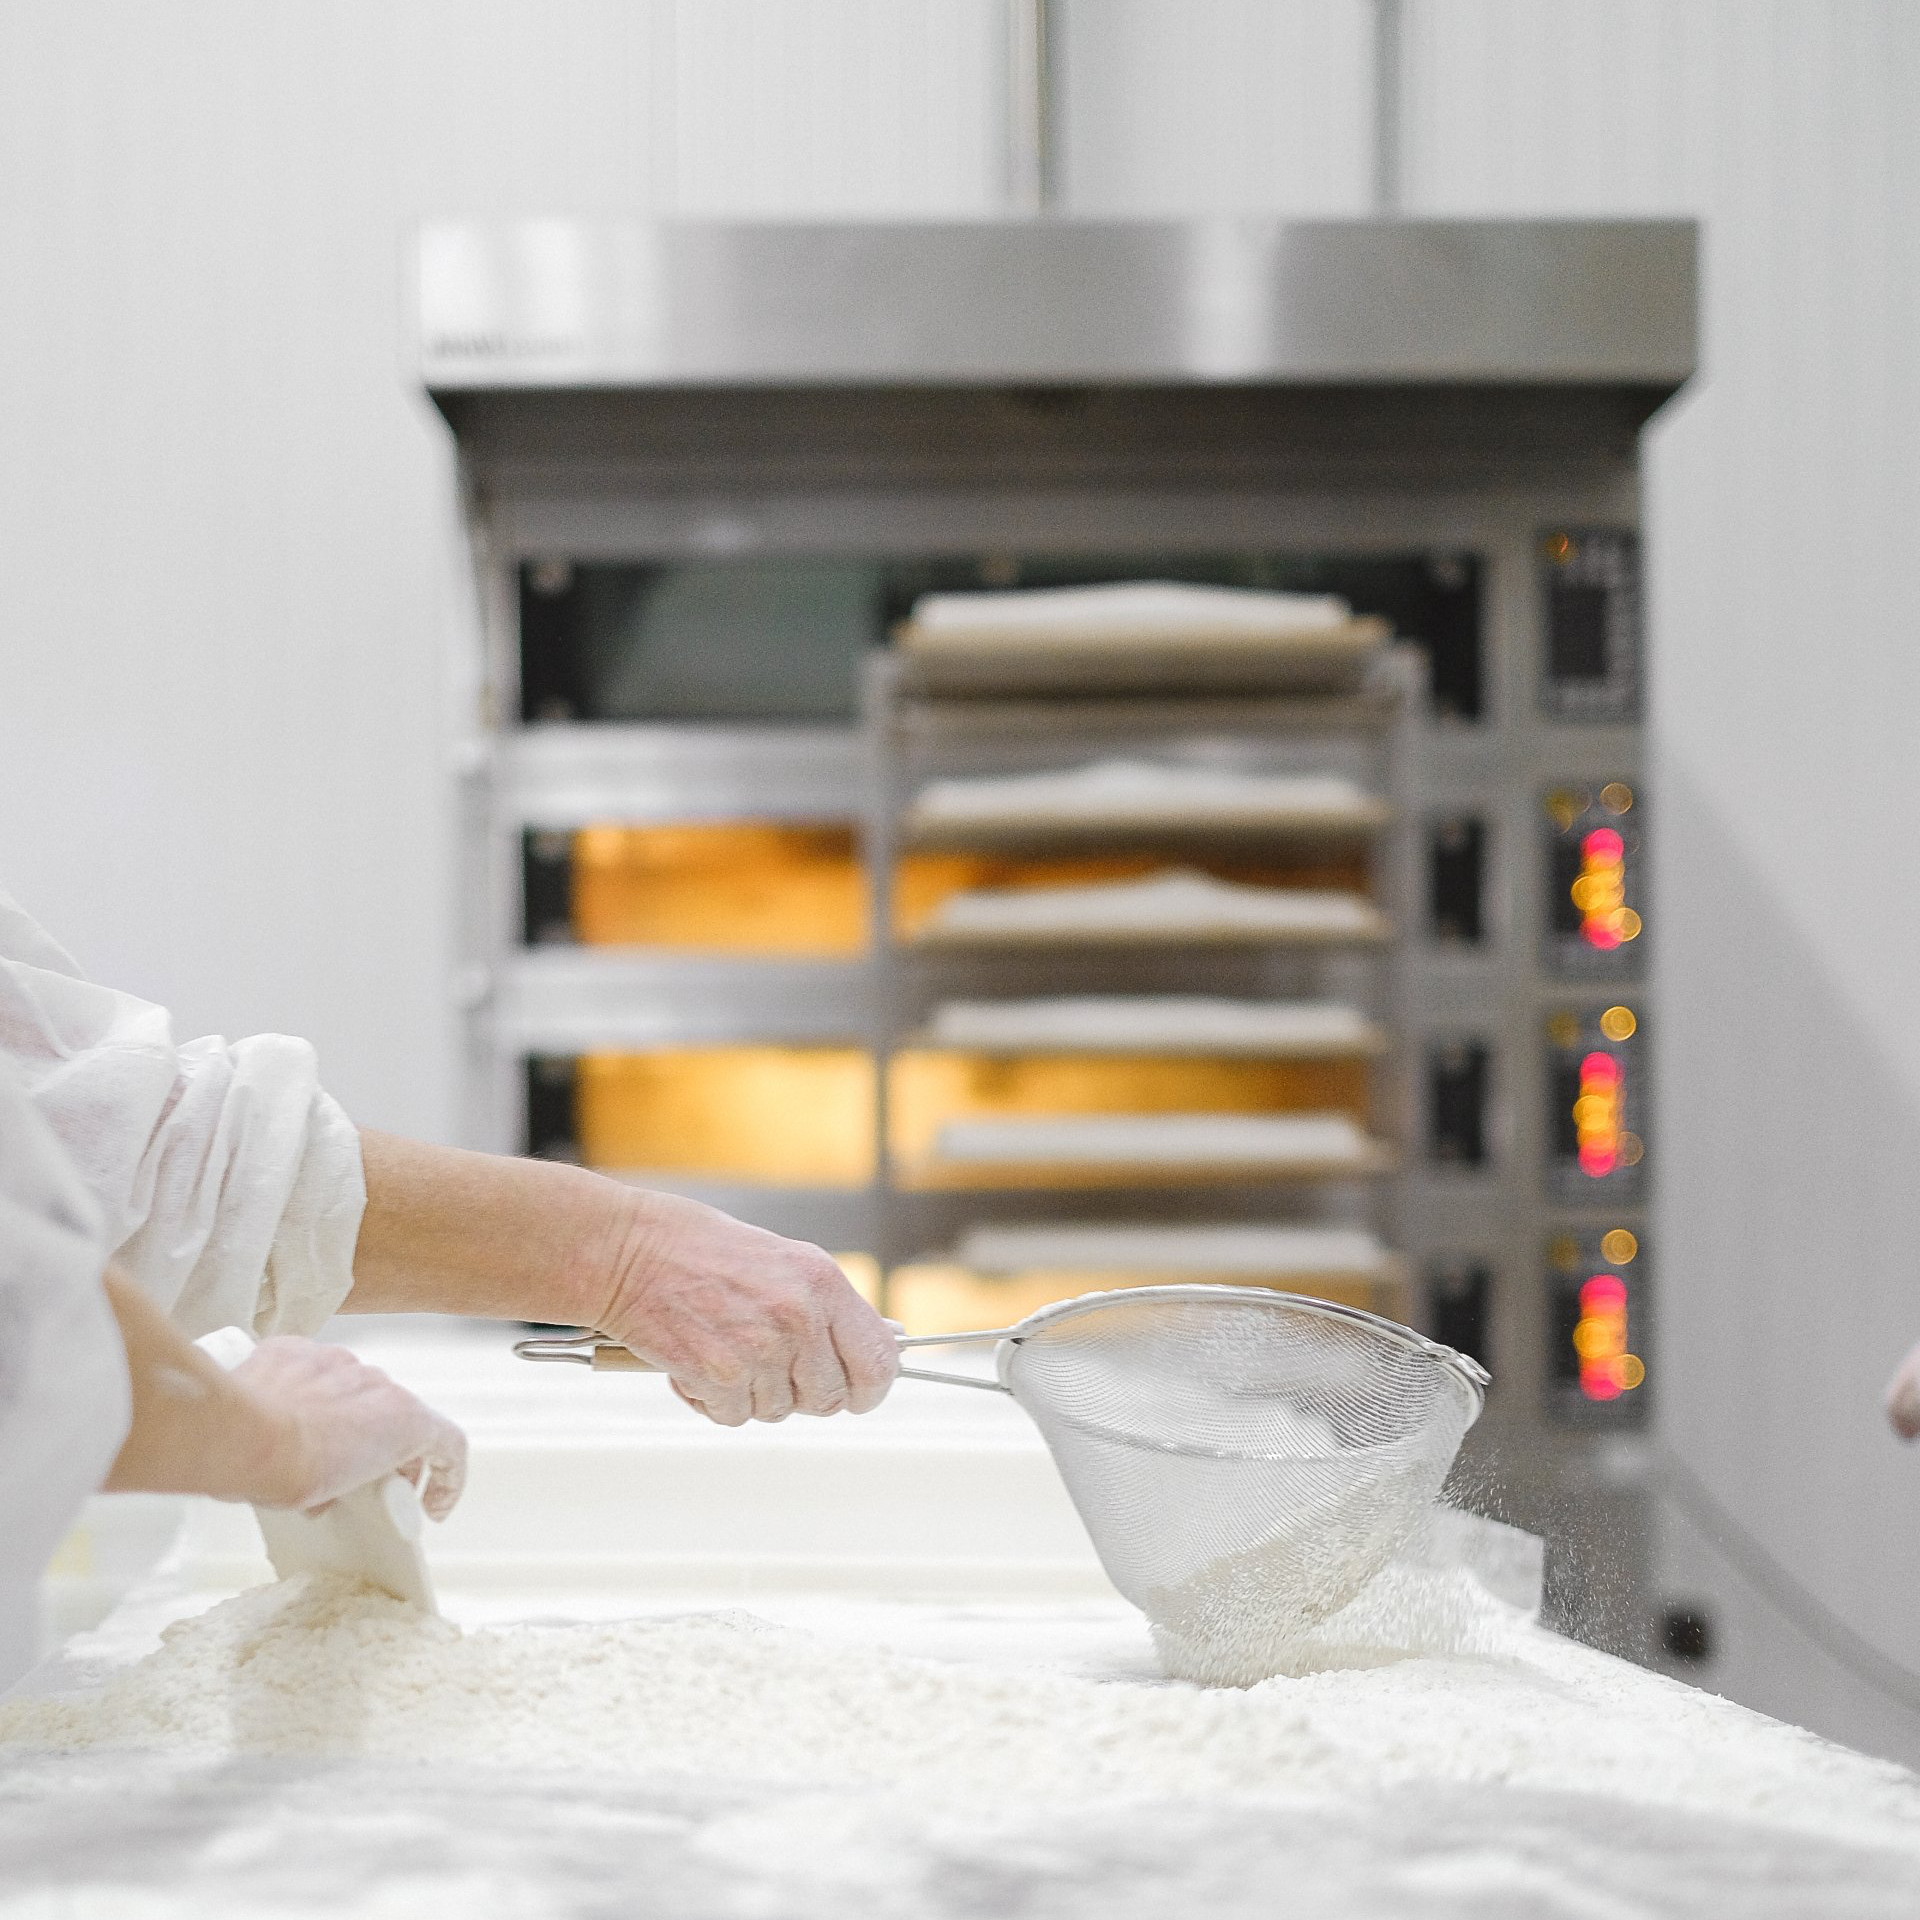 Worker sifting flour